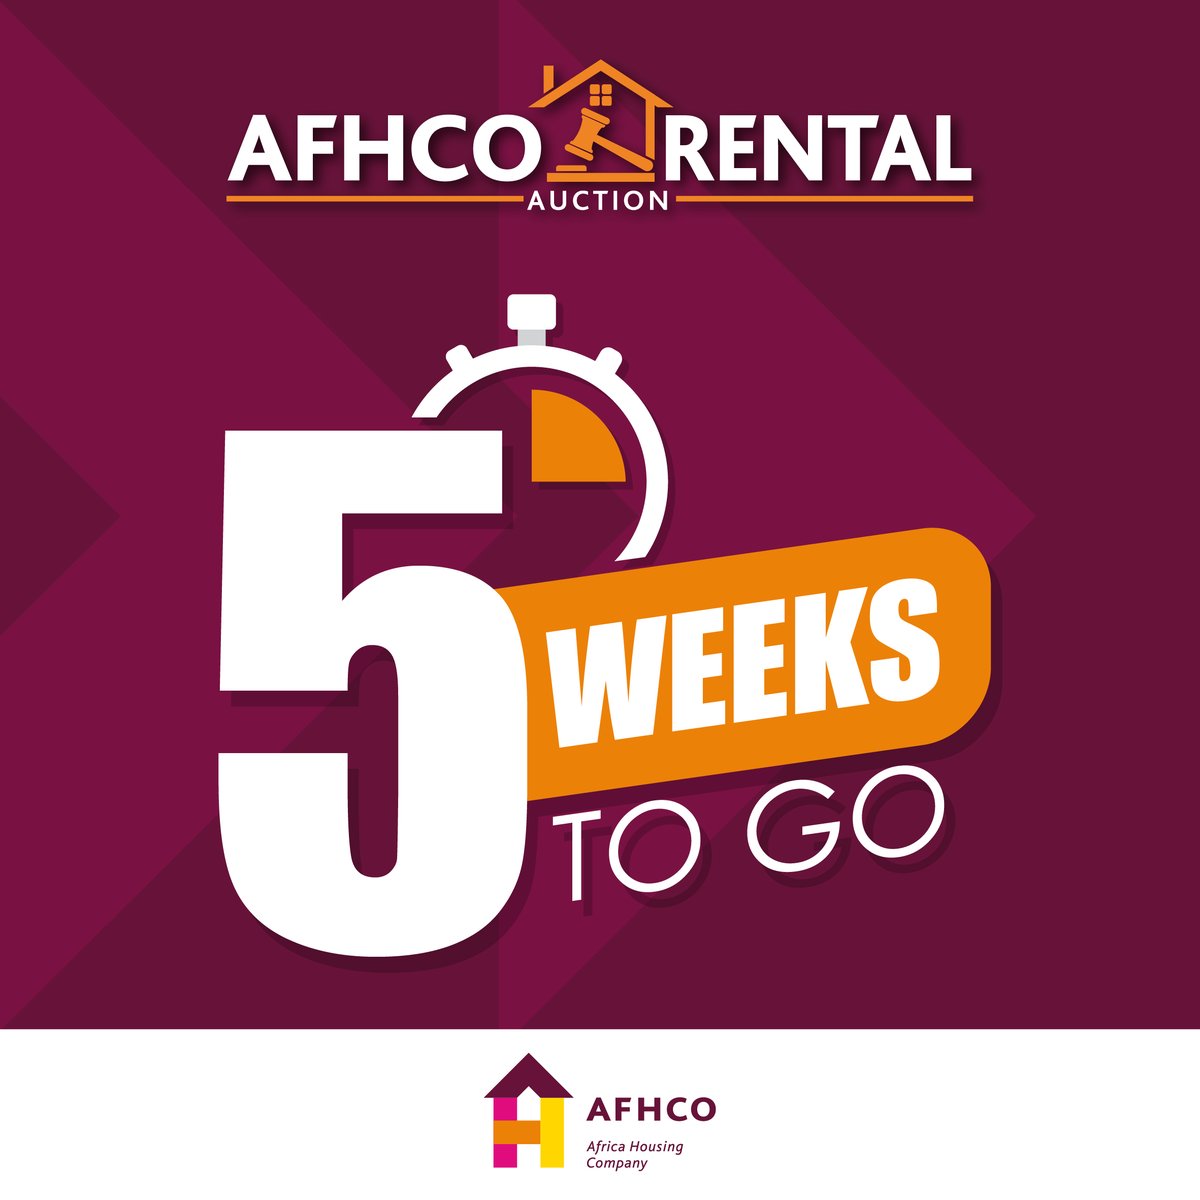 Count Down Begins! 5 weeks till the Rental Auction Begins! 

#AFHCORentalAuction #innercityrentals #cityliving #MoveUp #StaywithAFHCO #apartmentstolet #MoveUpwithAFHCO #AFHCO #propertymanagement #rent #apartments #johannesburg #gauteng #property